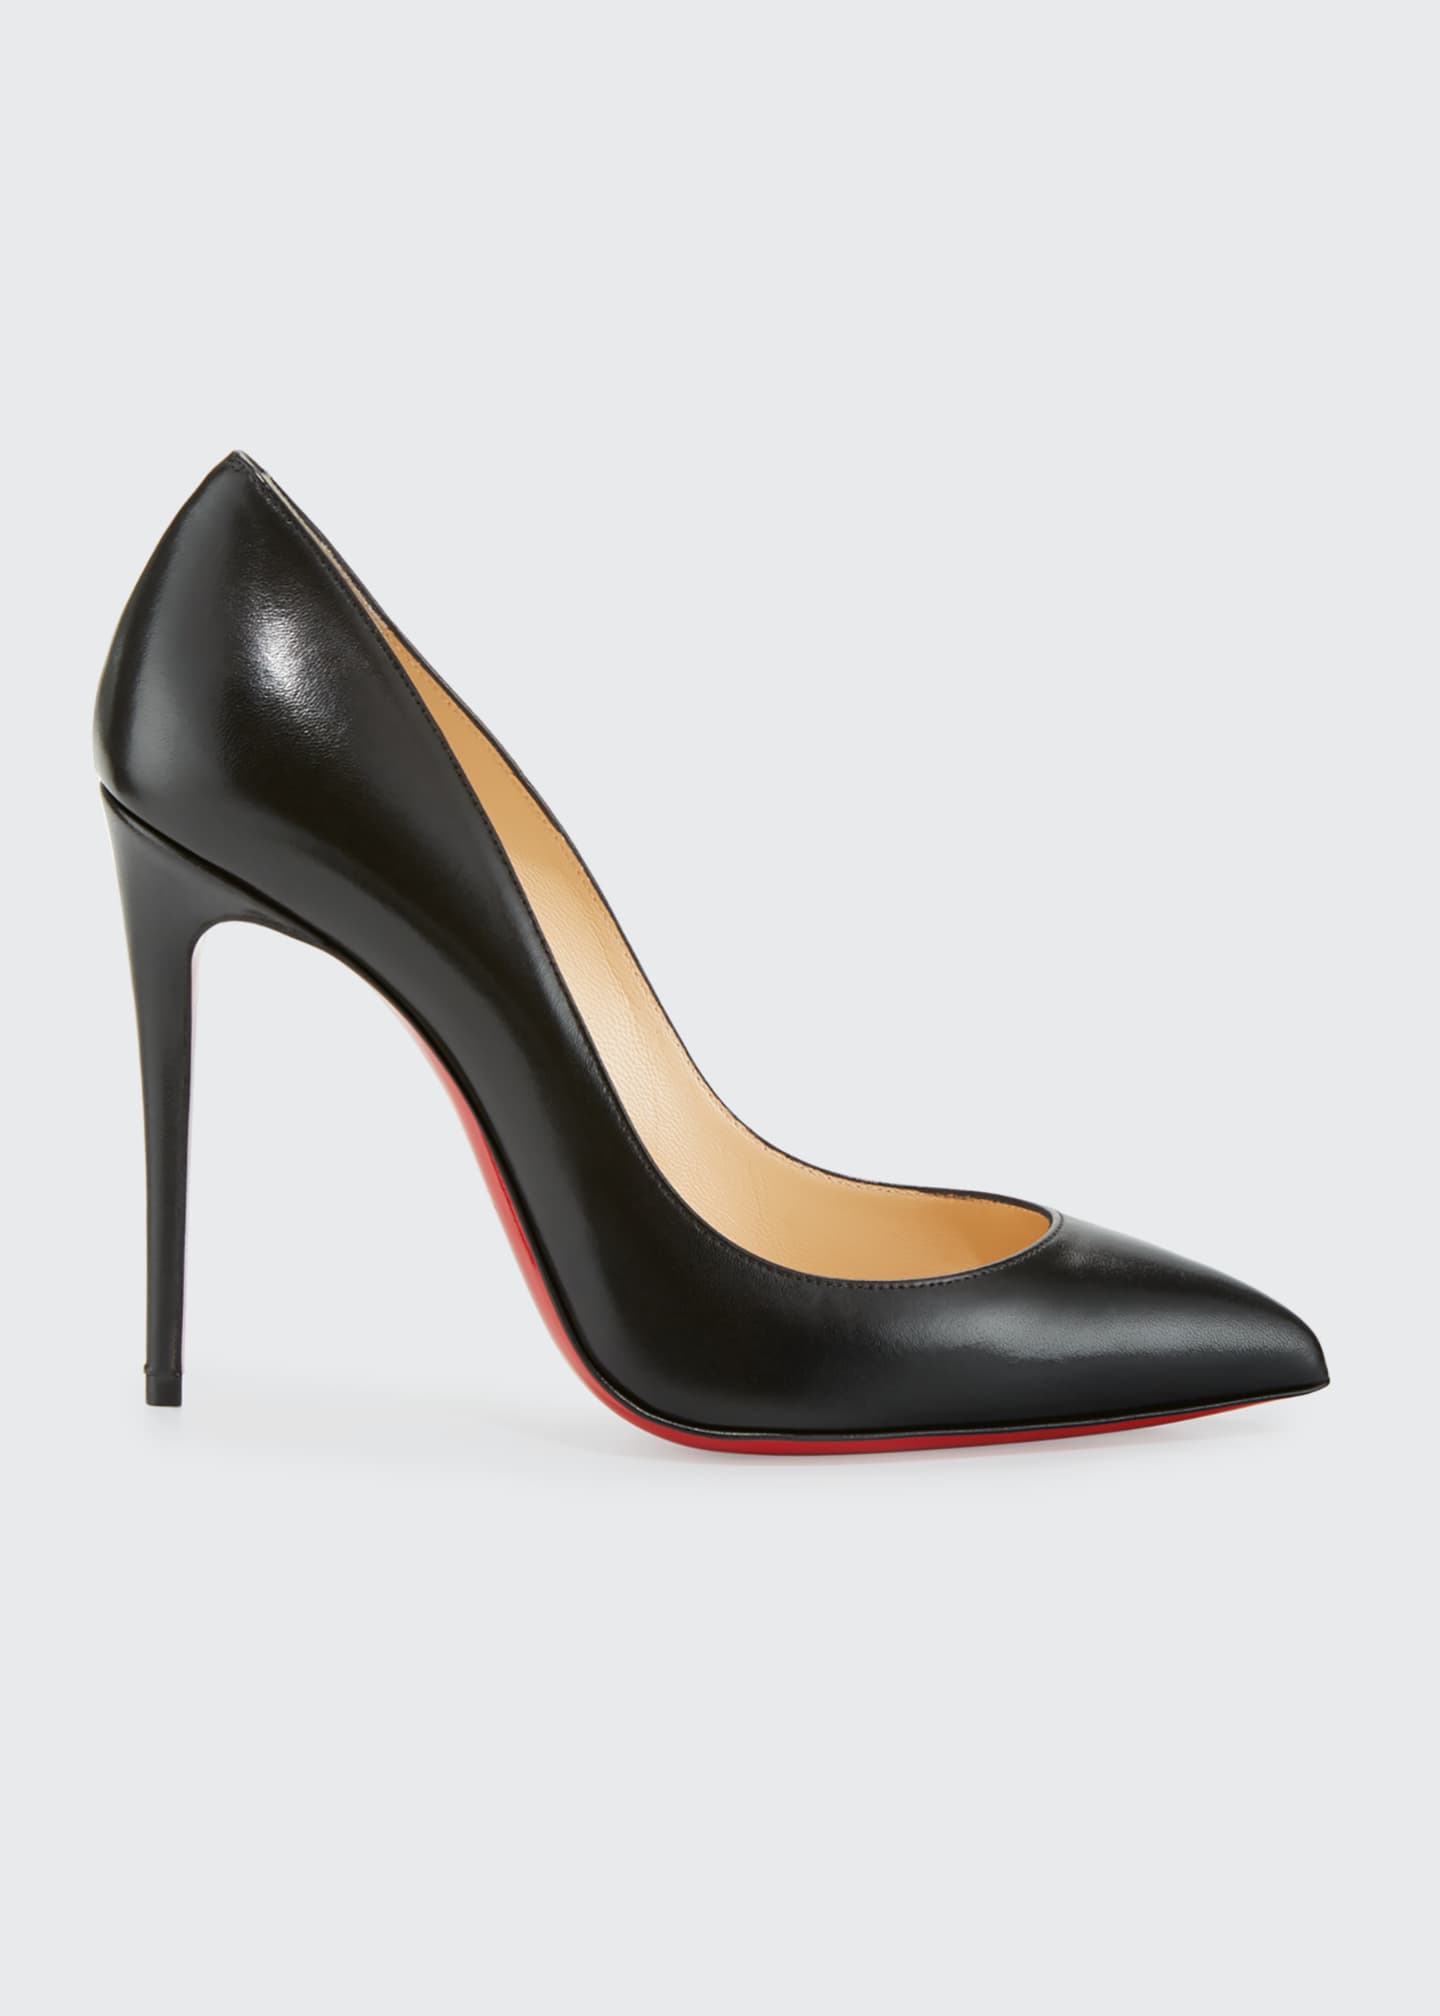 Christian Louboutin Pigalle Follies Leather 100mm Red Sole Pumps, Black ...